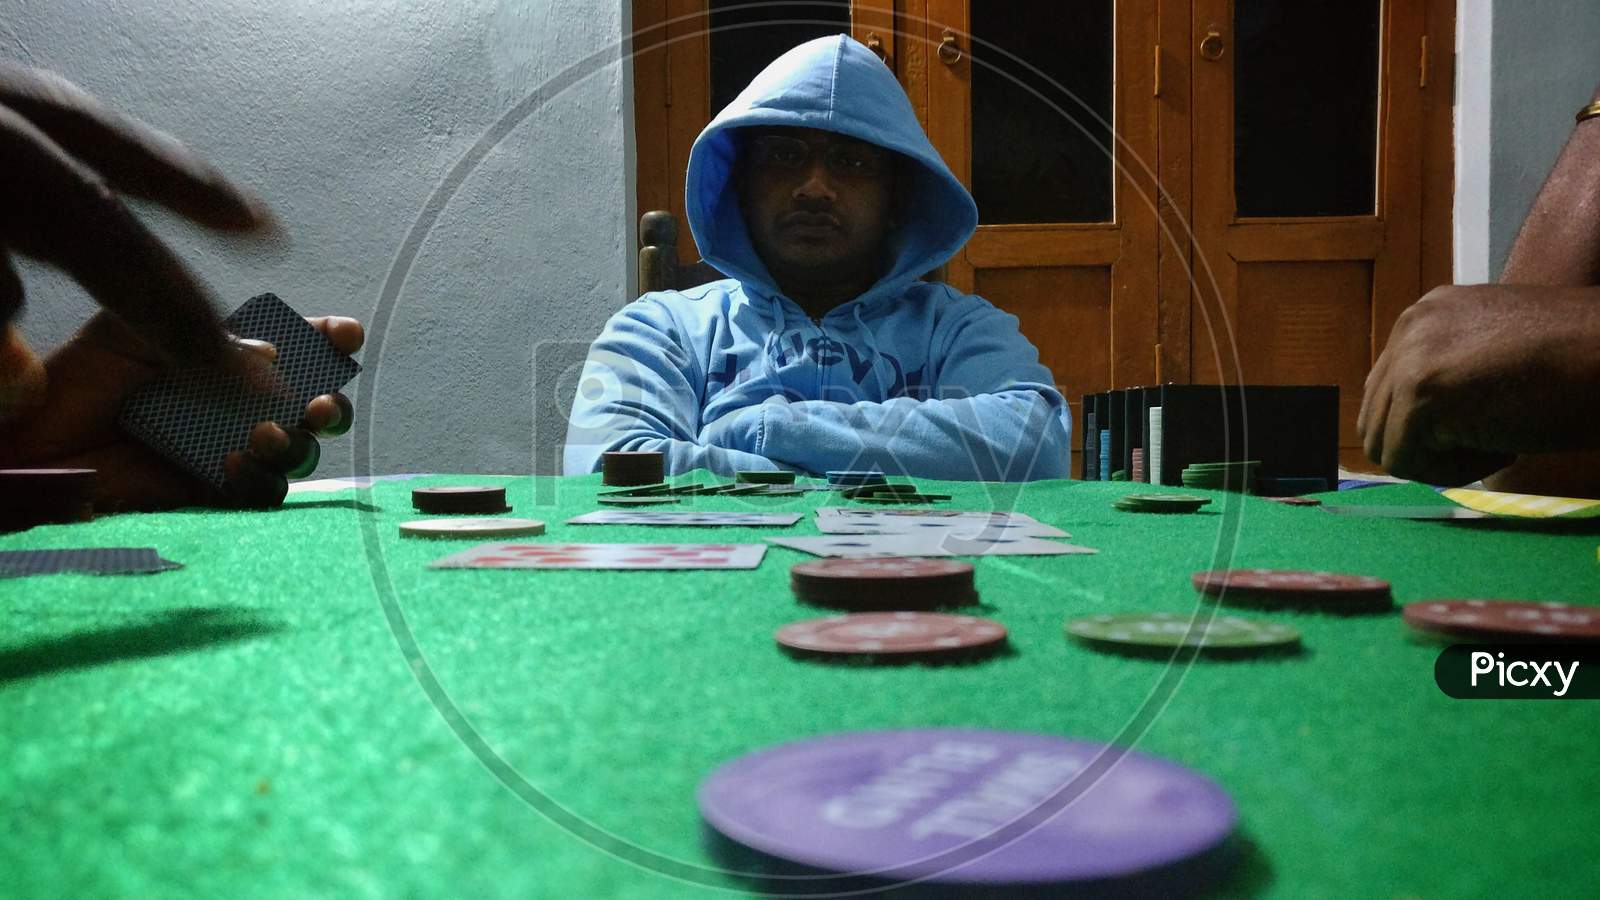 Men Dealer Or Croupier Shuffles Poker Cards In A Casino On The Background Of A Table, Chips,. Concept Of Poker Game, Game Business, India.